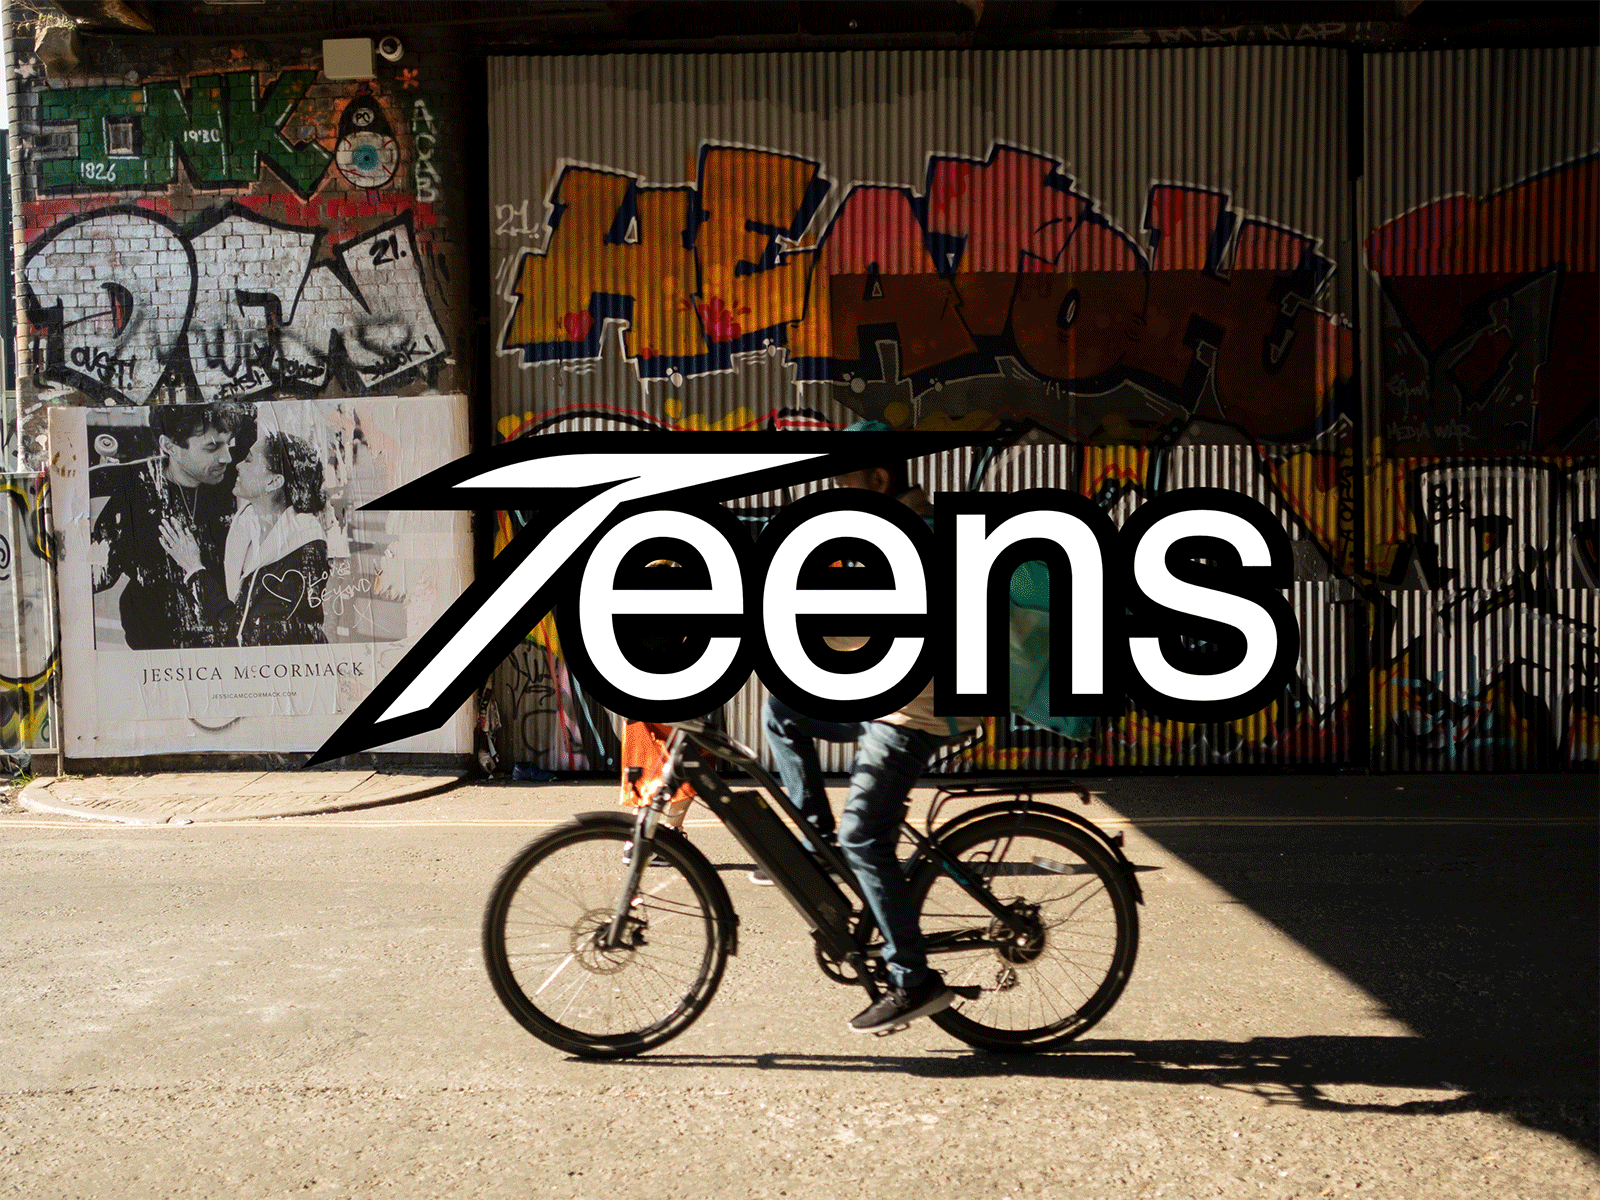 Teens Logo - emphasis on letter t brand identity branding cool design group hip hype hypebeast kids letter t logo logo design logomark logotype t t logo teens trends trendy young